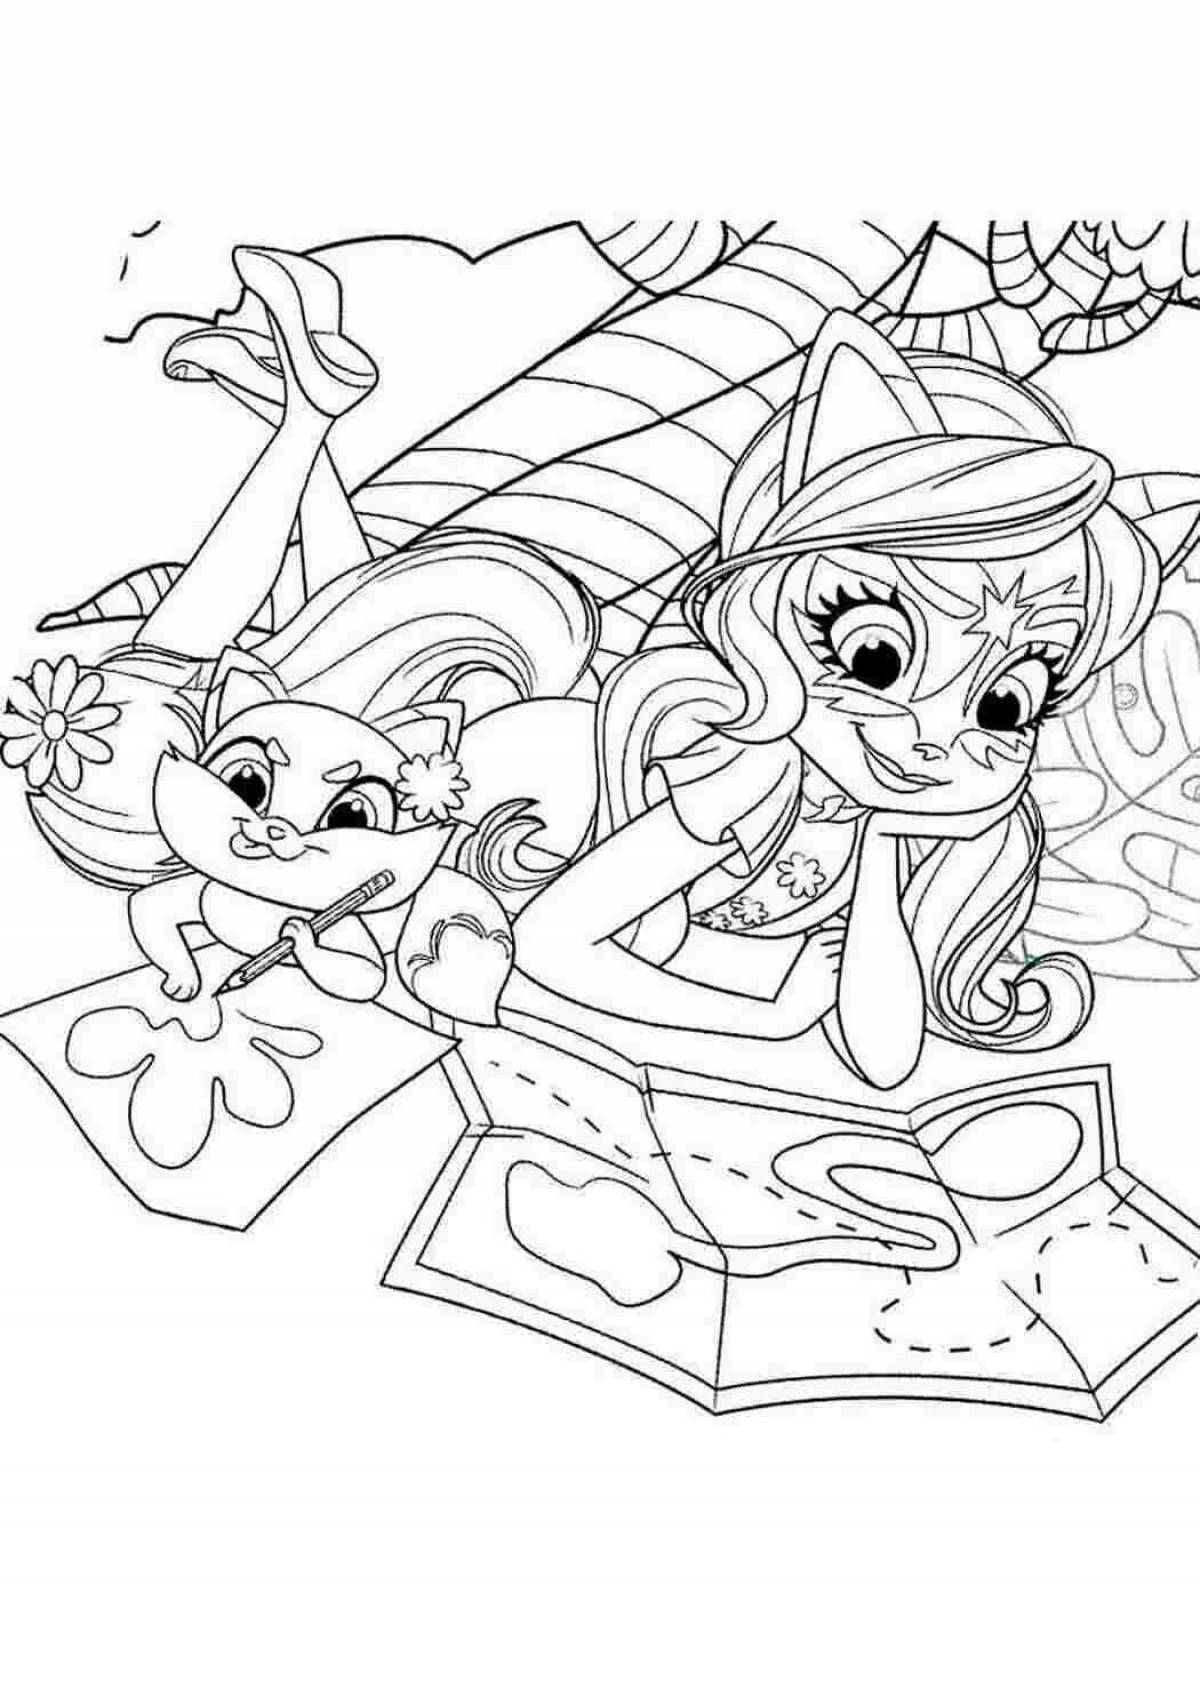 Sparkling entenchymal coloring pages